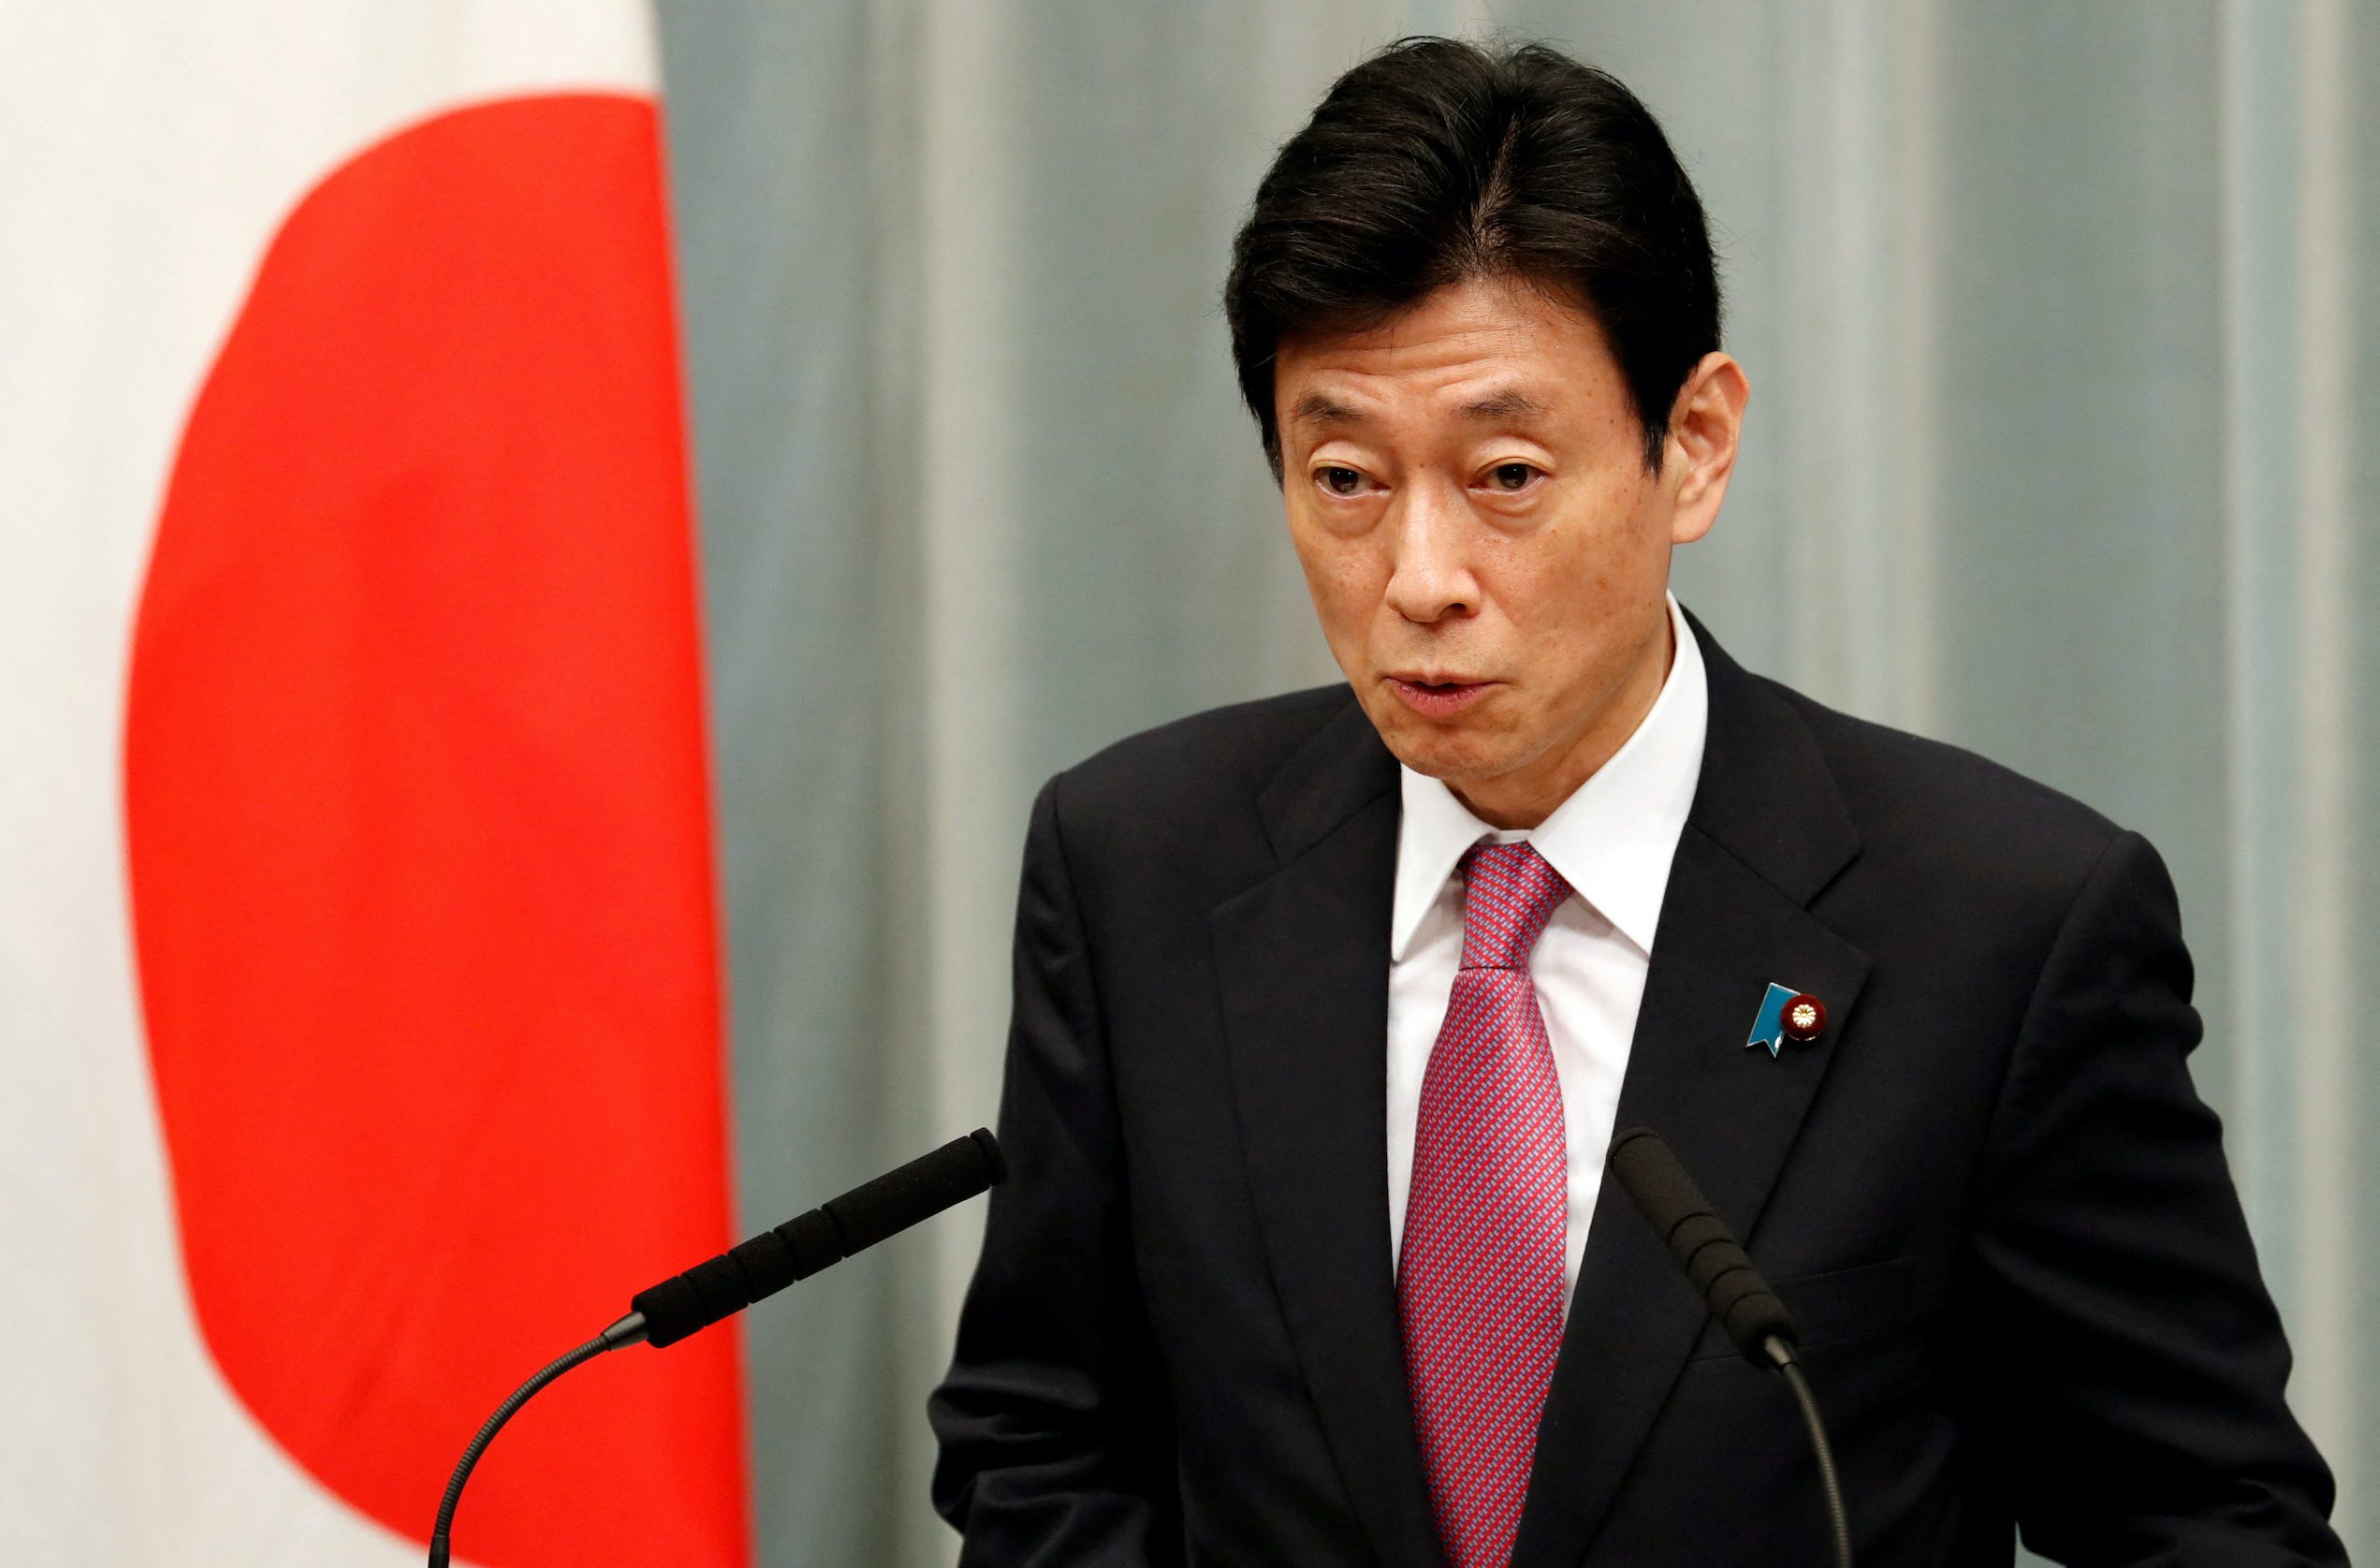 Japan pledges financial support to help ASEAN decarbonize